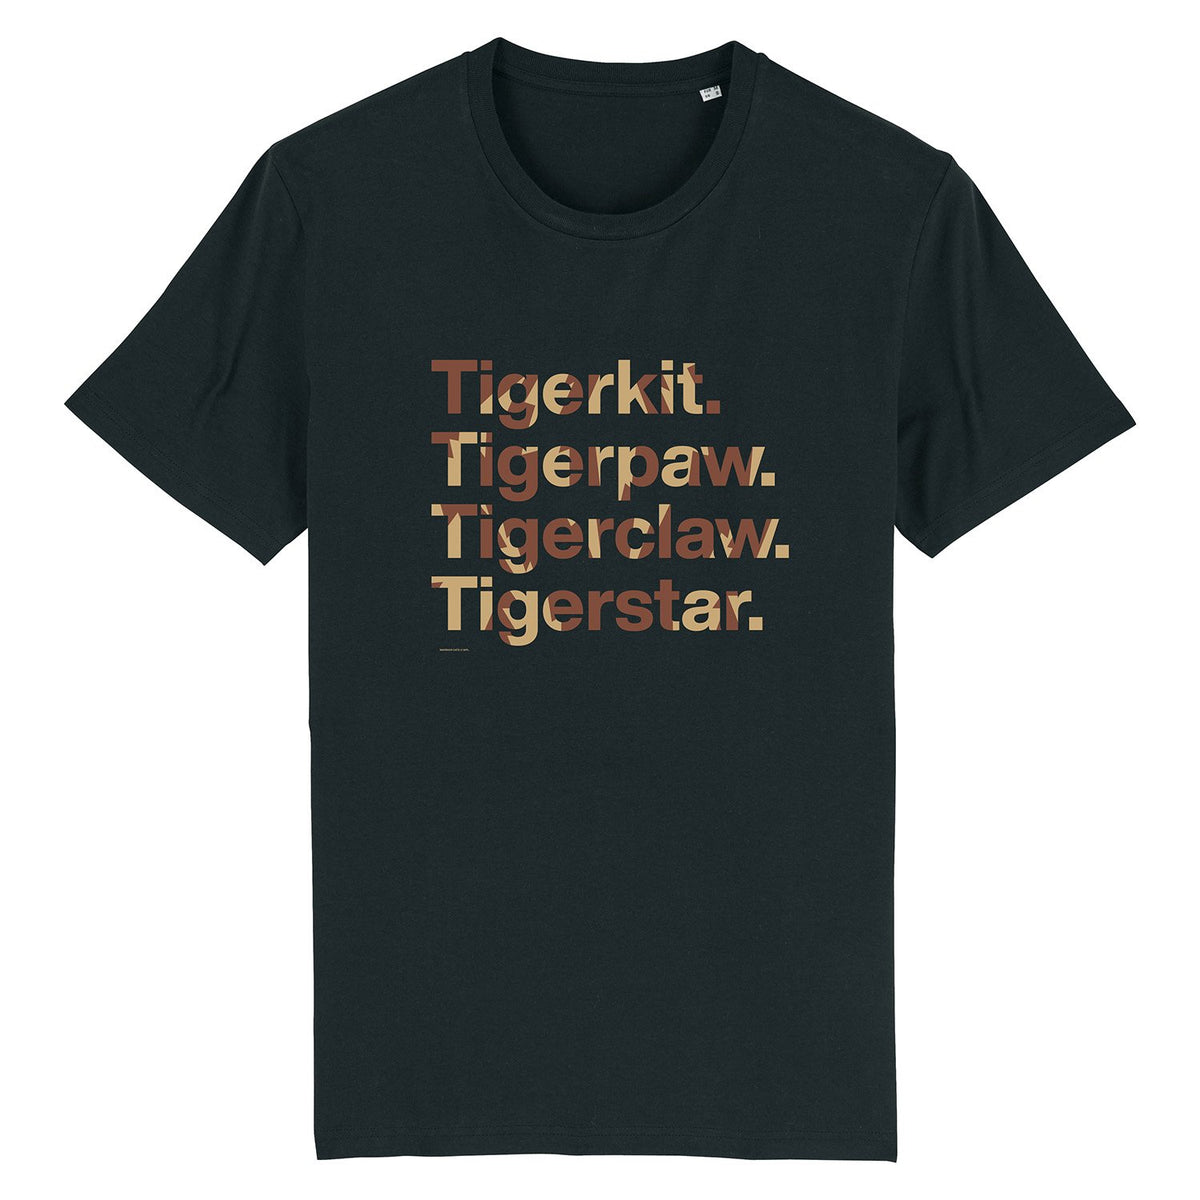 Character Names - Tigerstar - Youth Unisex T-Shirt